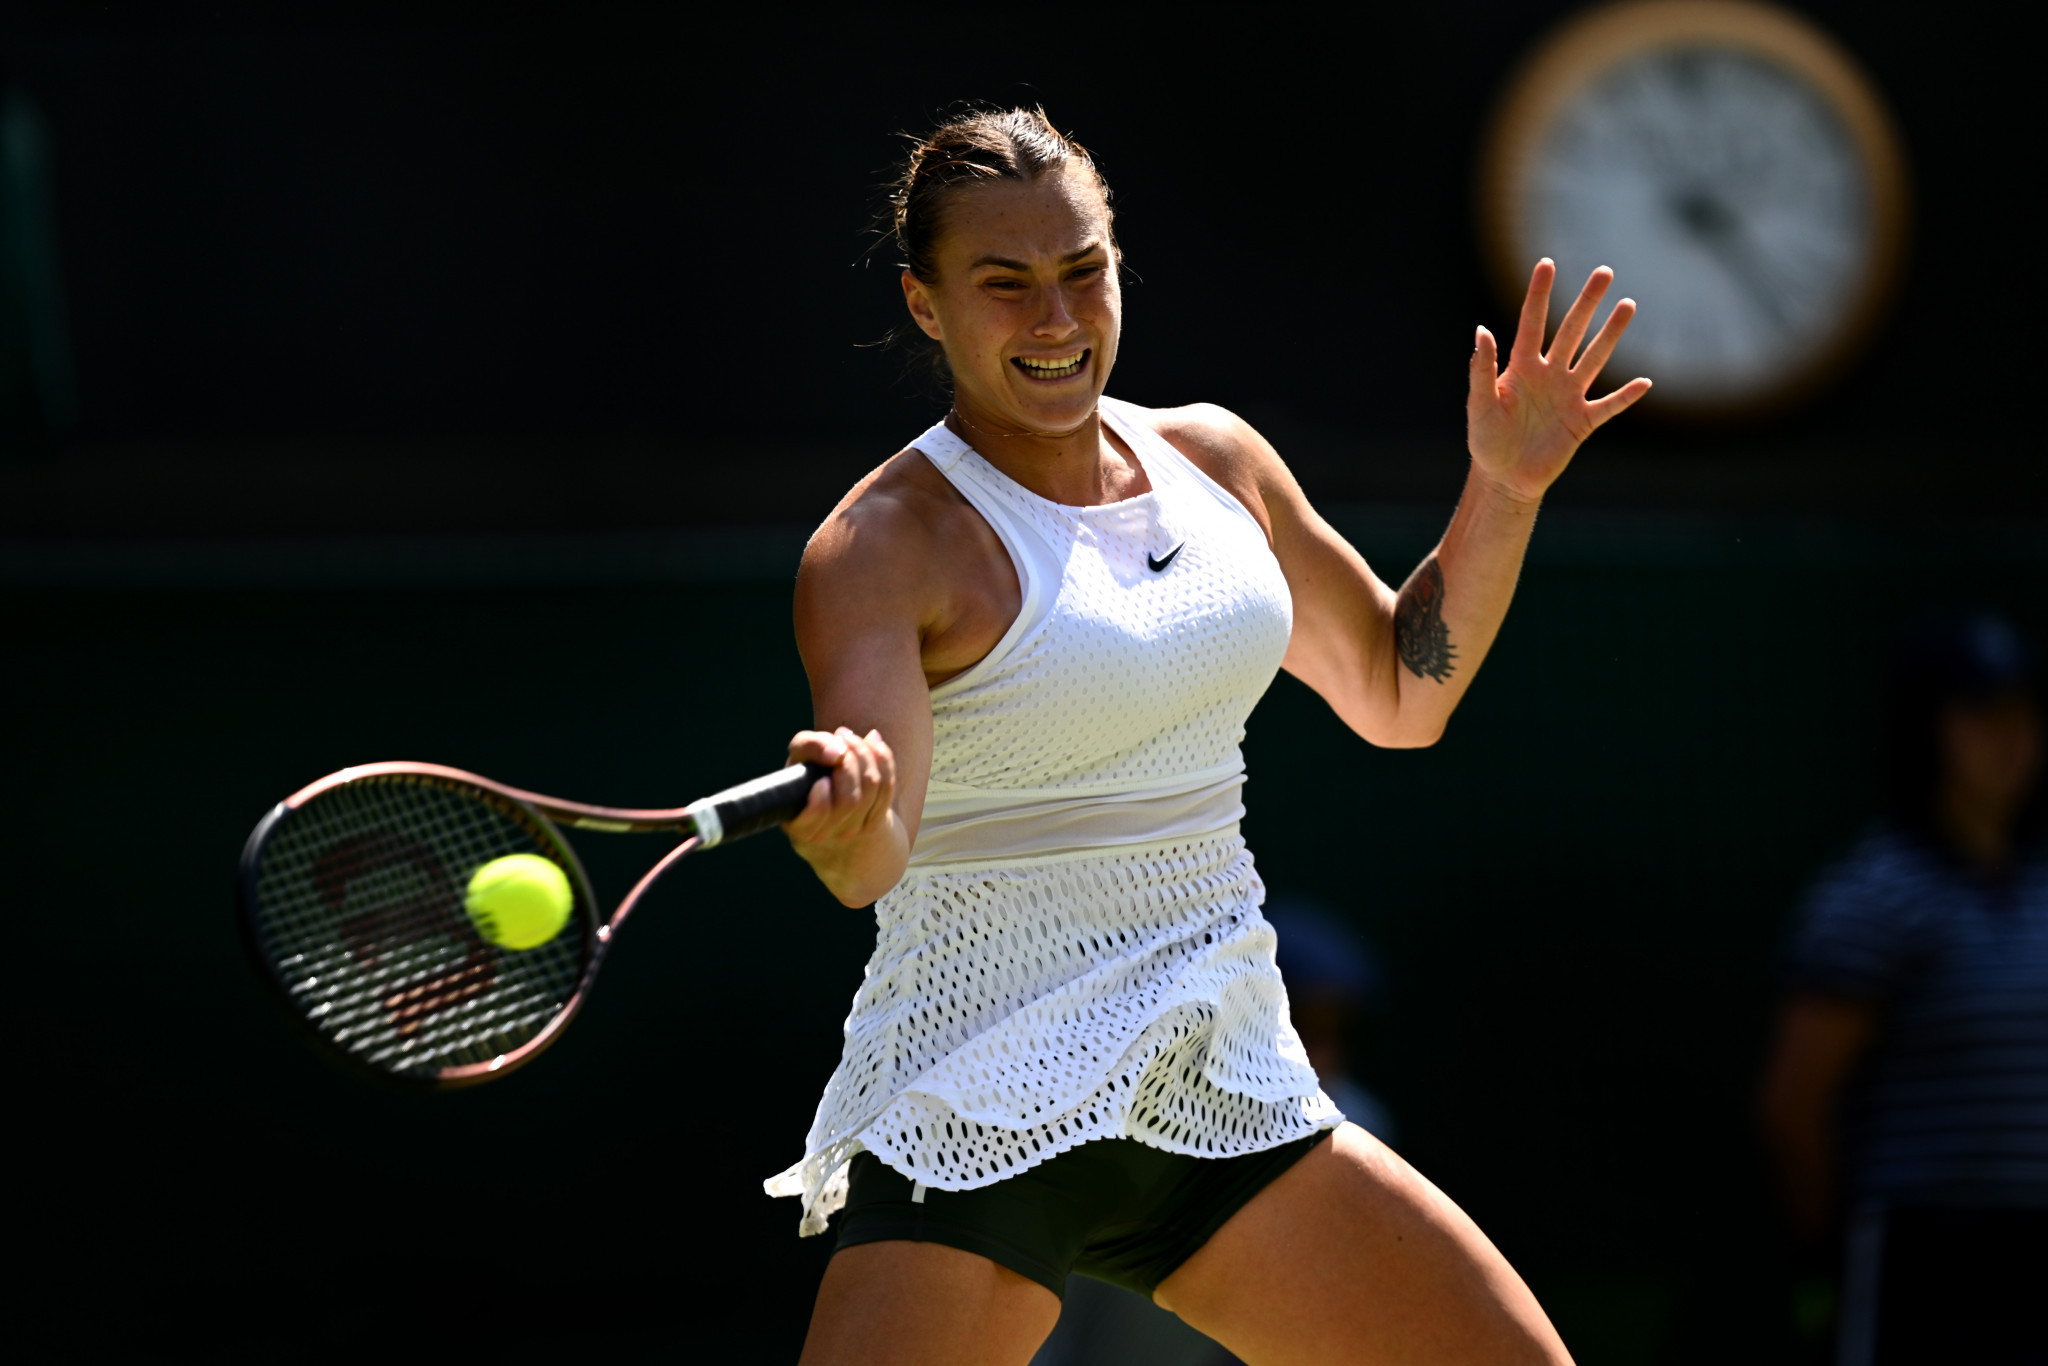 Second seed Aryna Sabalenka of Belarus recovered well to despatch French world number 42 Varvara Gracheva 2-6, 7-5, 6-2 ©Getty Images